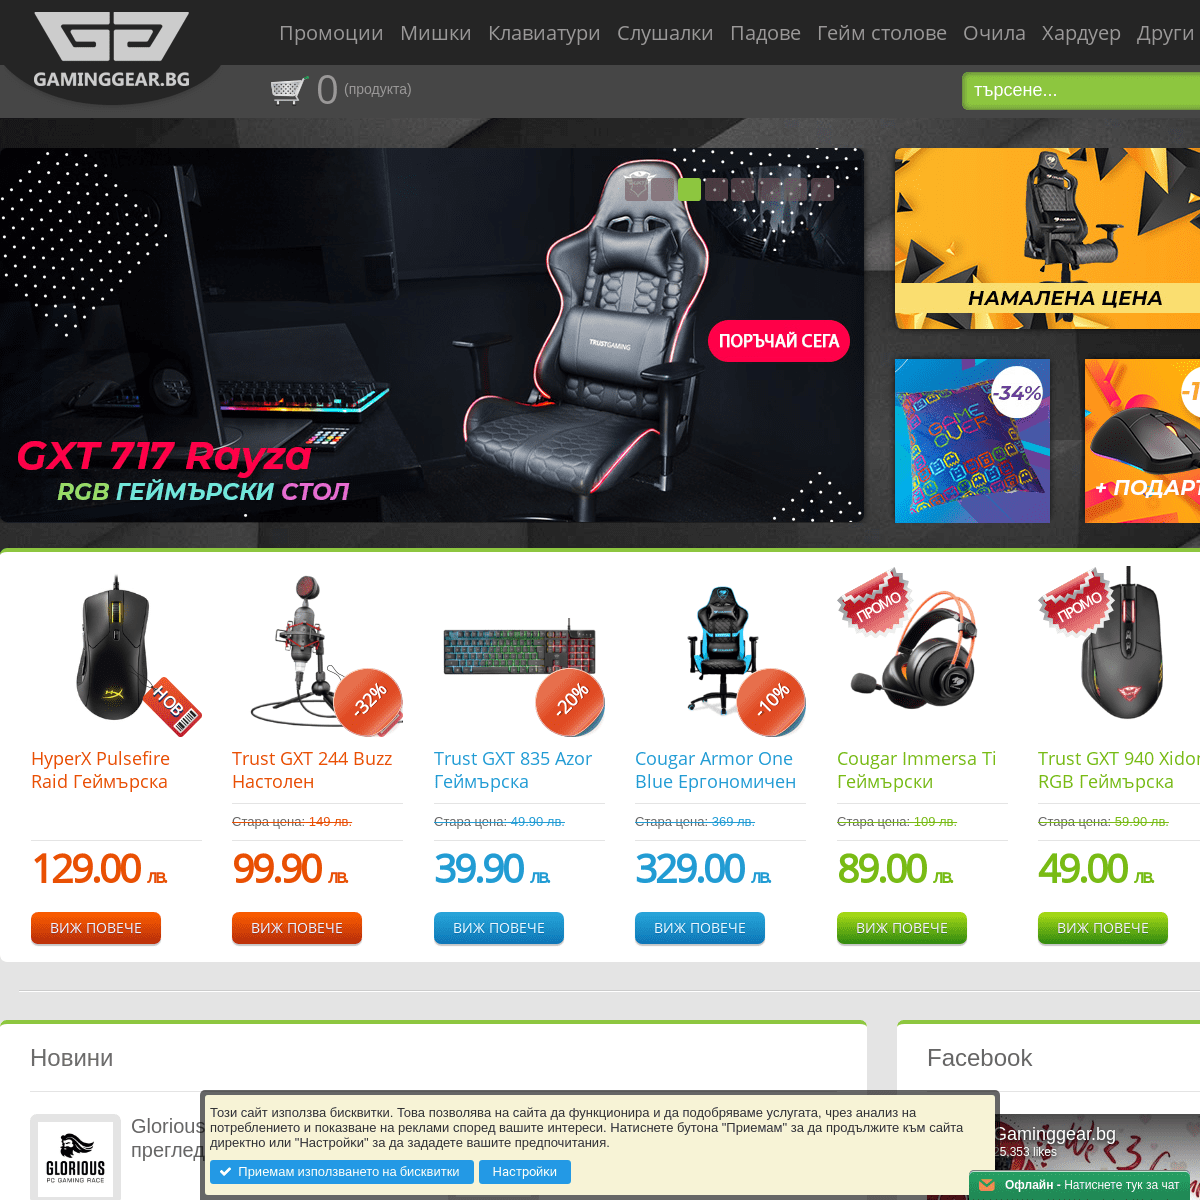 A complete backup of gaminggear.bg